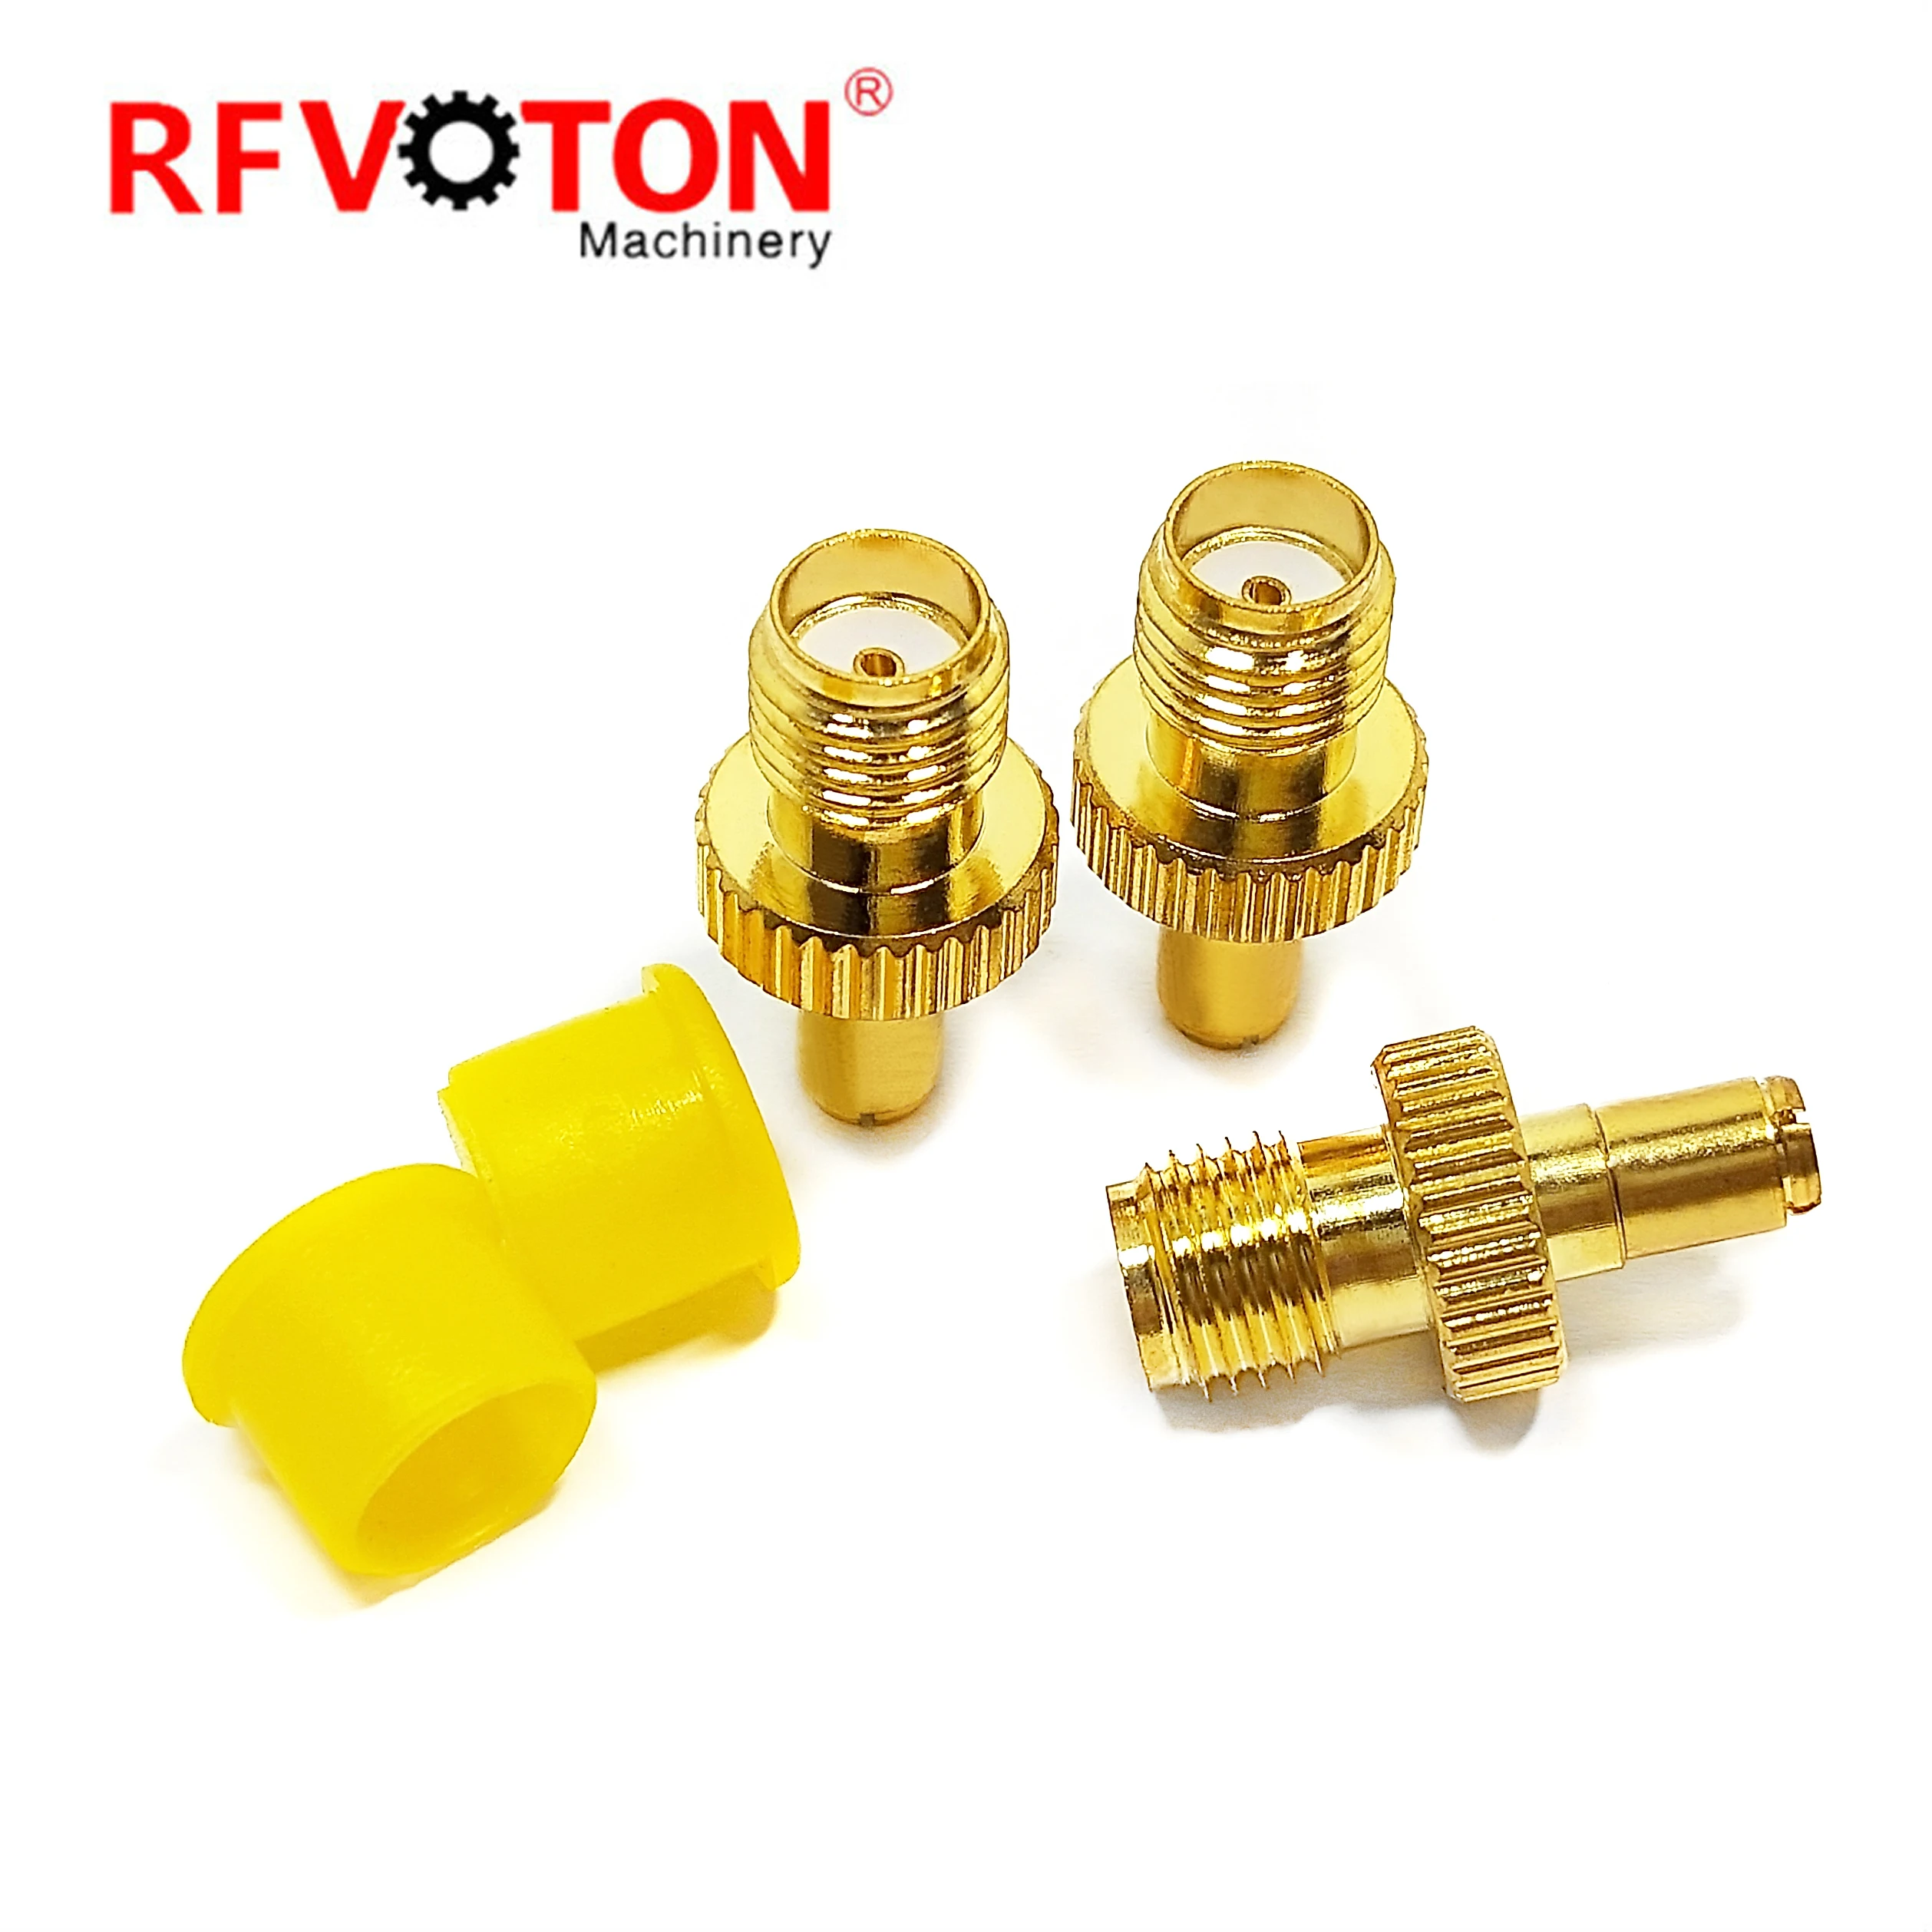 Factory directly Wholesale RF Adaptor SMA Female Jack To TS9 Male Plug RF Coax Coaxial Adapter RF Converter manufacture